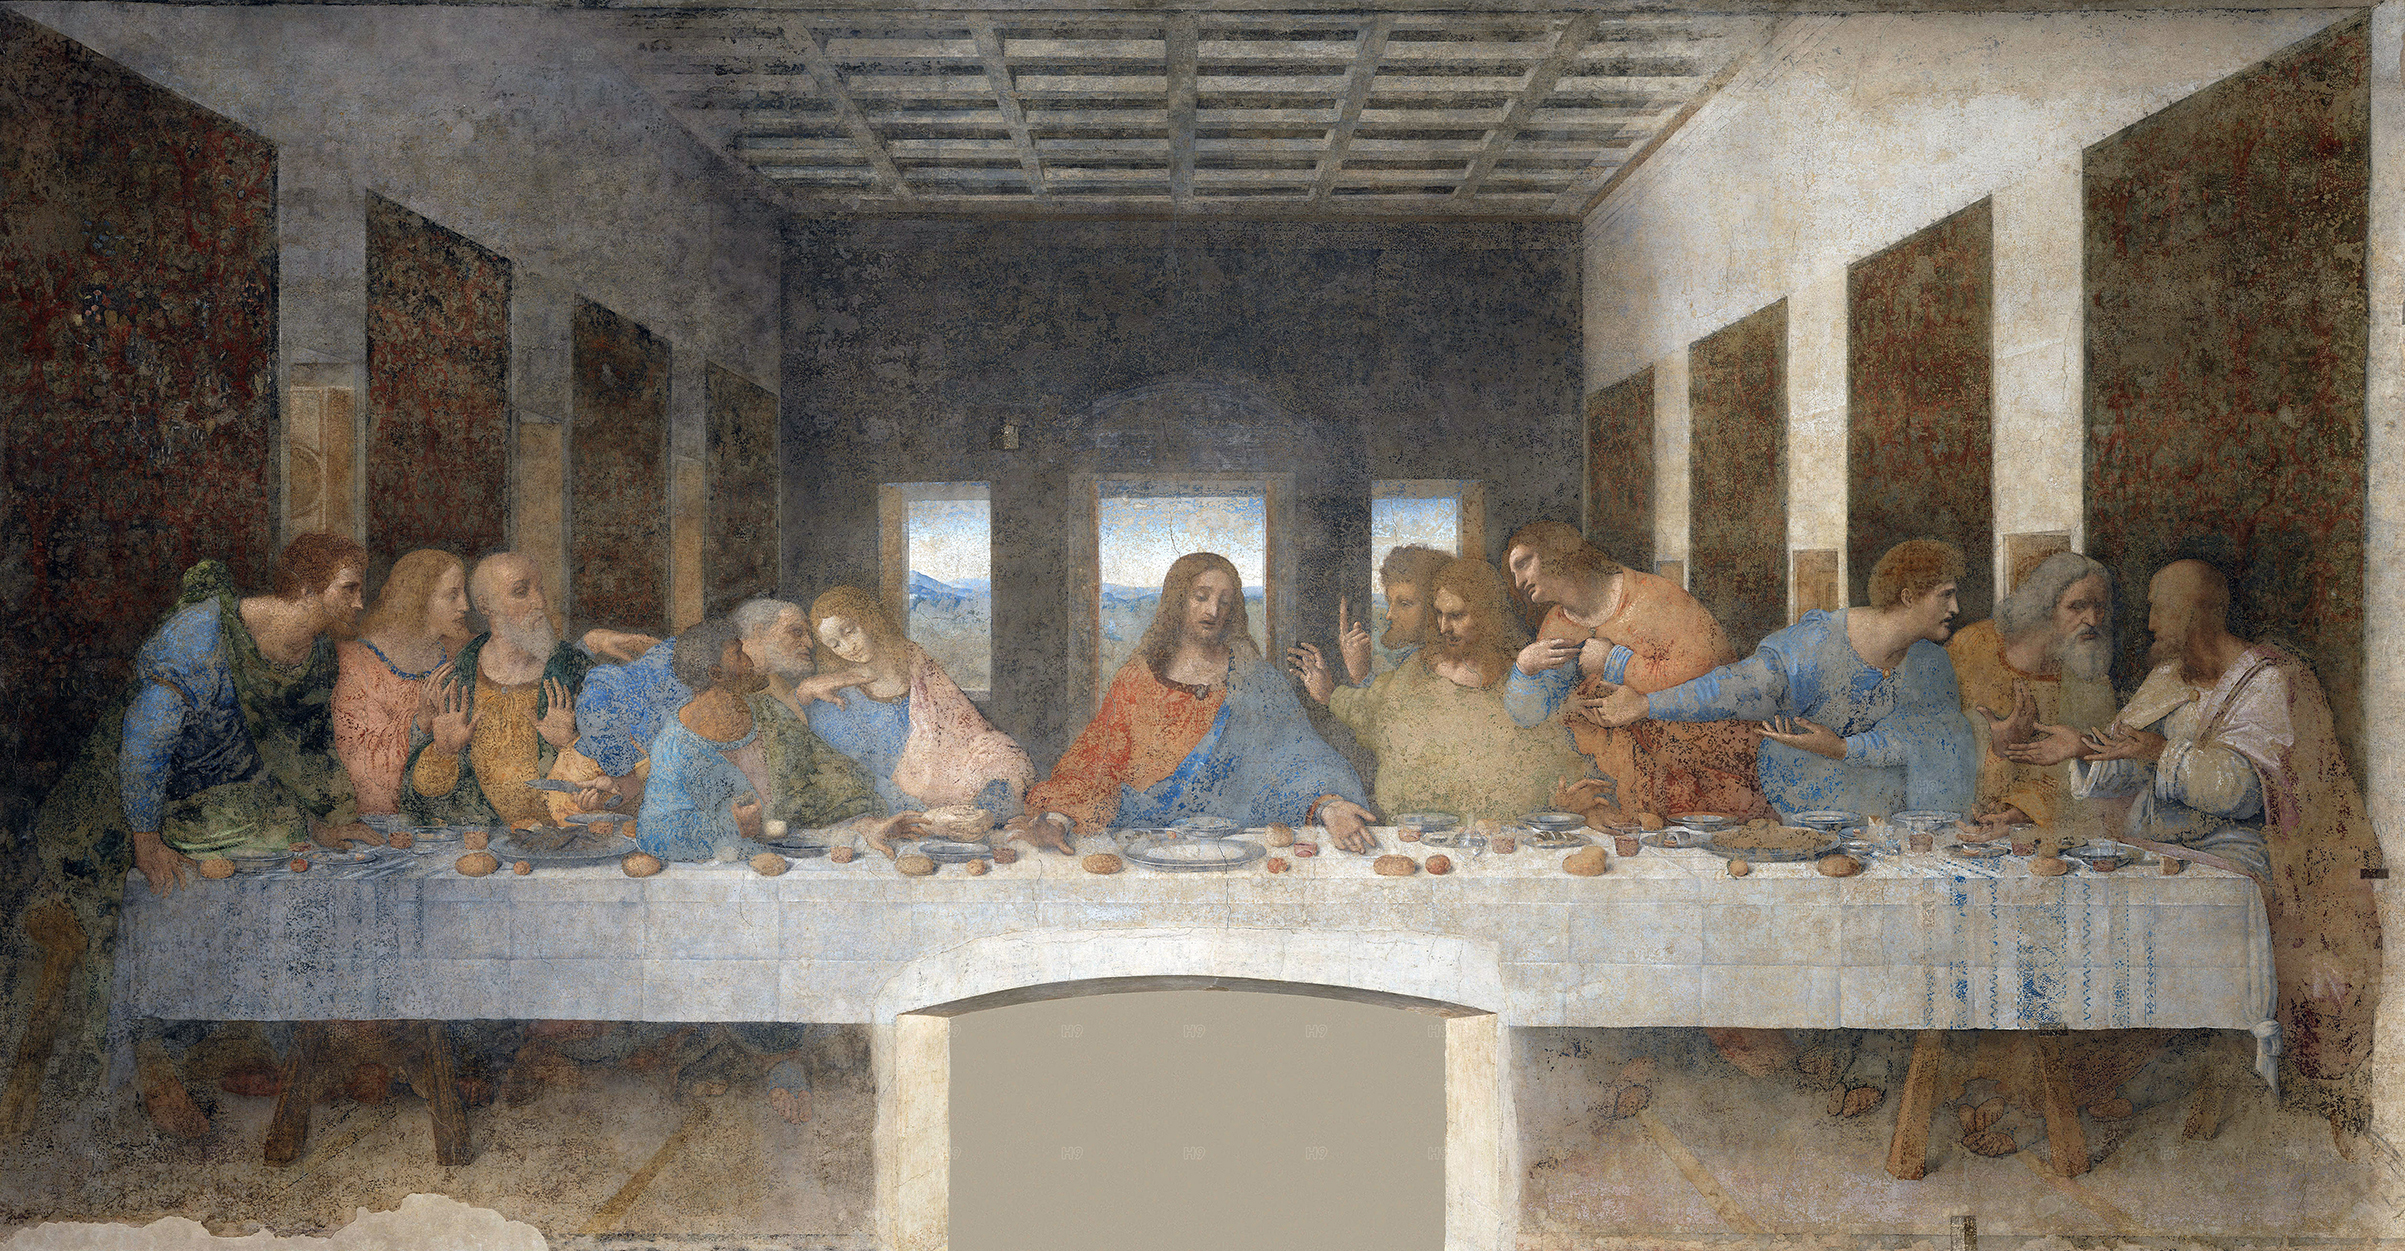 Leonardo da Vinci started painting his famous Last Supper mural in Milan in 1495 (Universal History Archive/Getty Images)